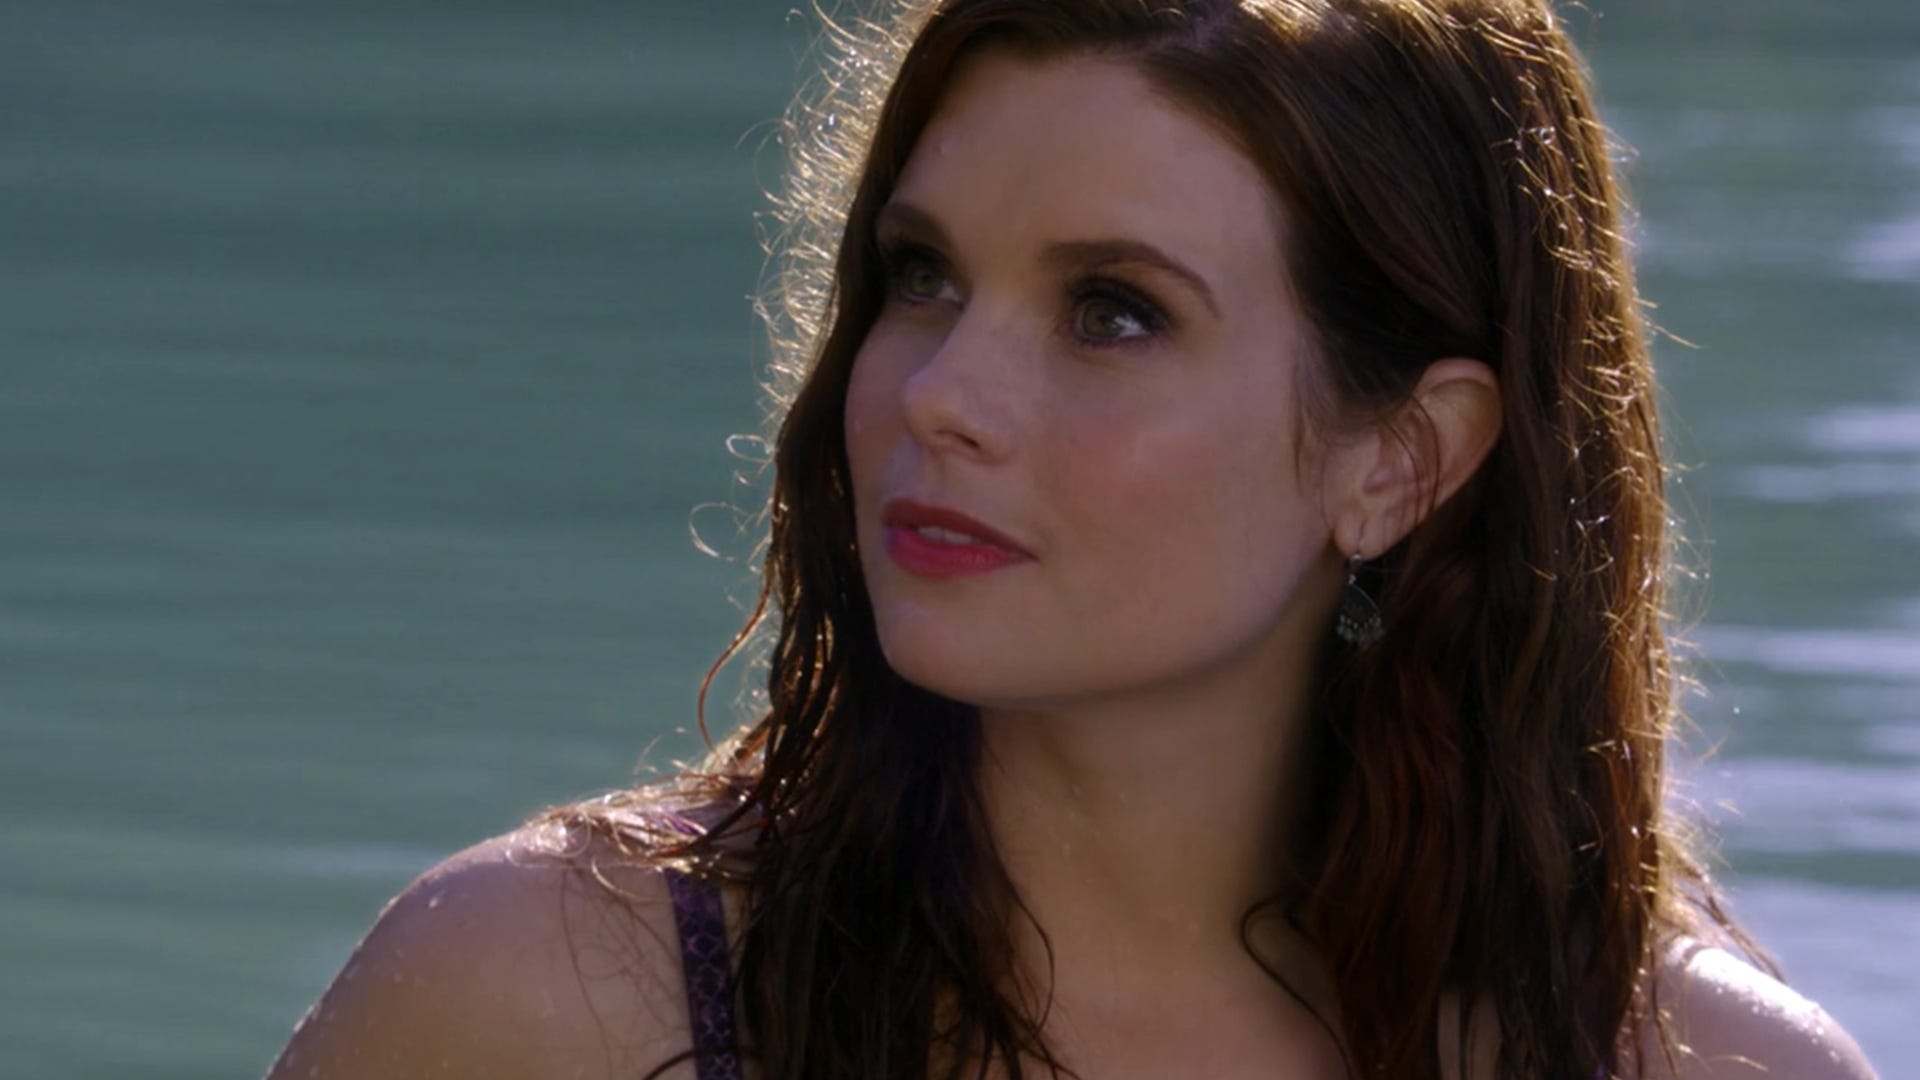 ​Joanna Garcia Swisher, Once Upon a Time